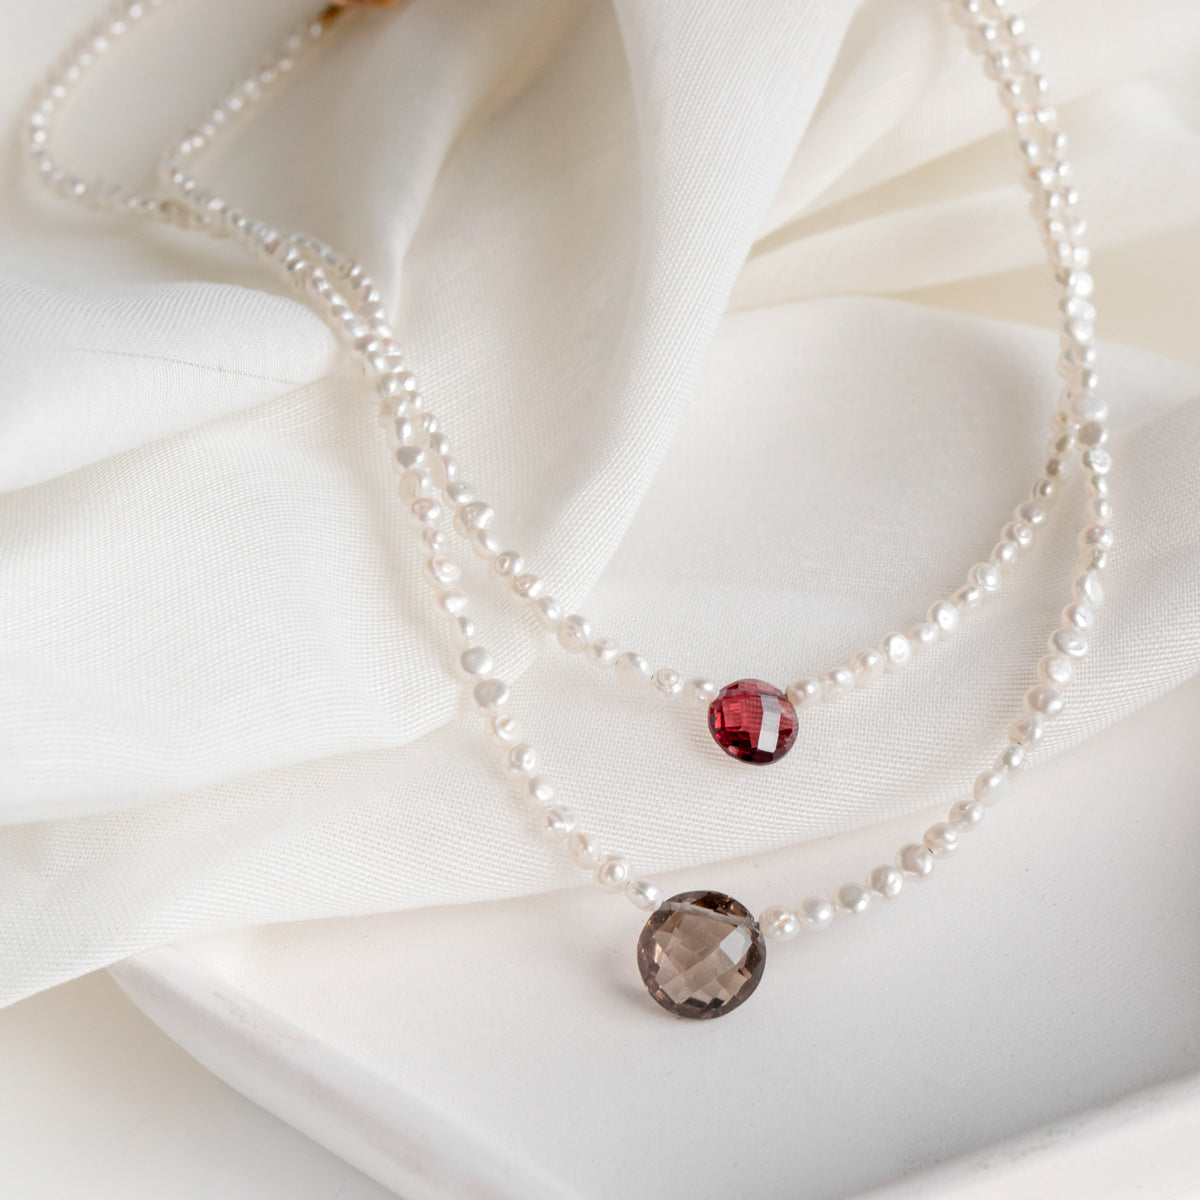 Coin Shaped Gemstone with Freshwater Keishi Pearl Necklace